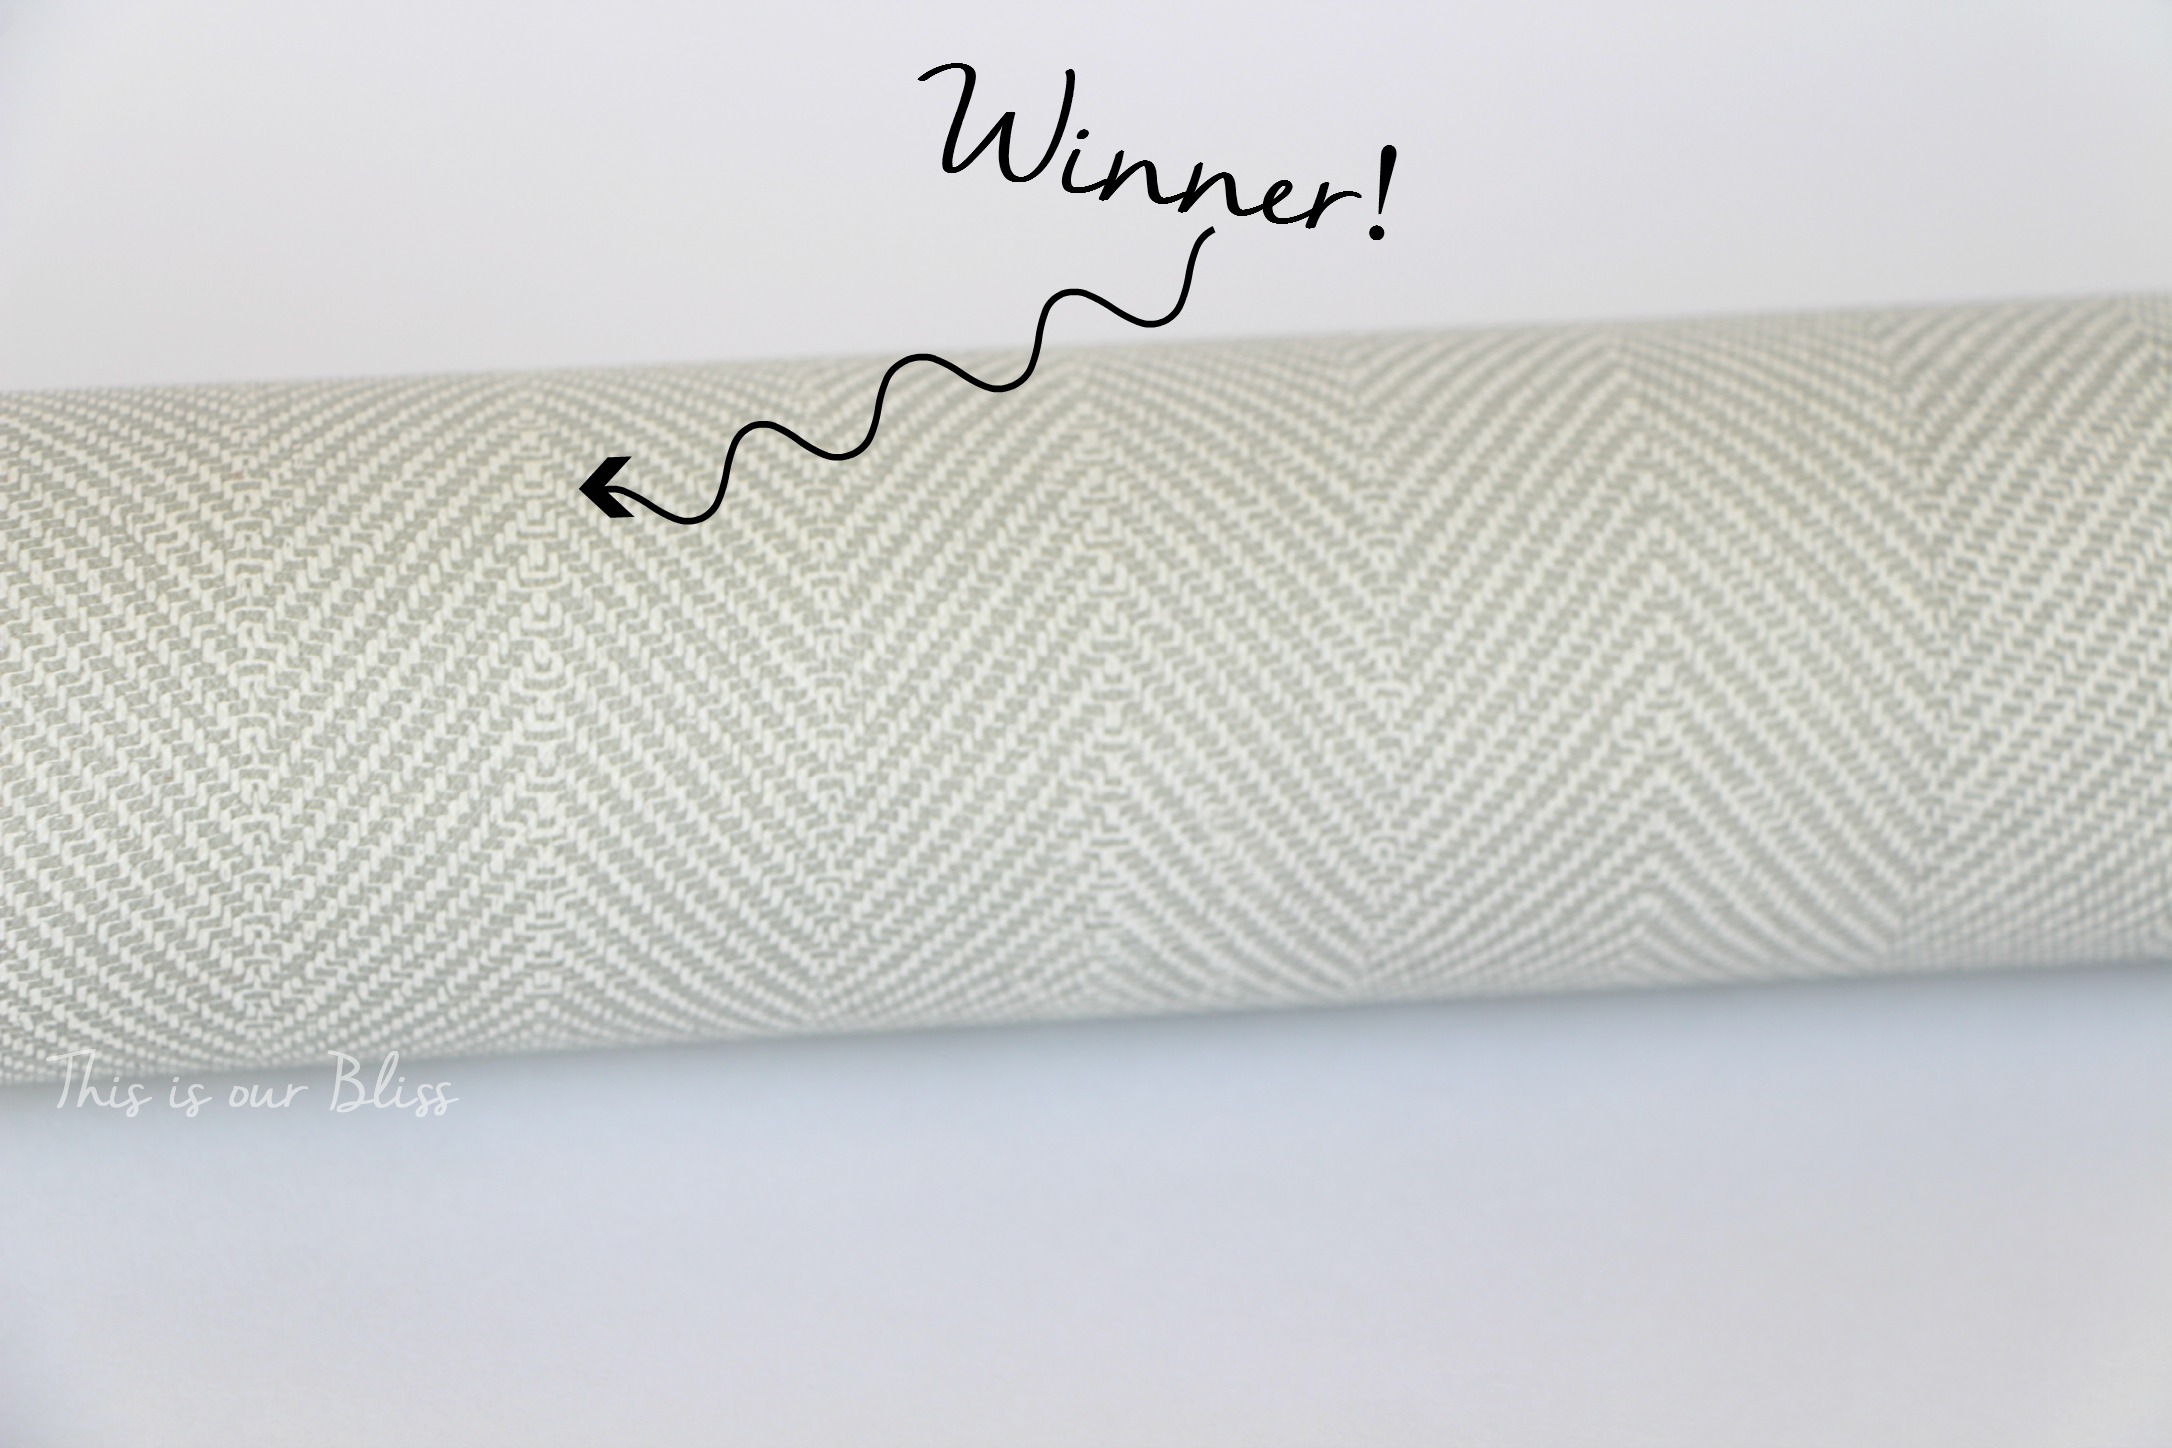 Wrapping paper wall covering winner! - DIY wall covering - This is our Bliss